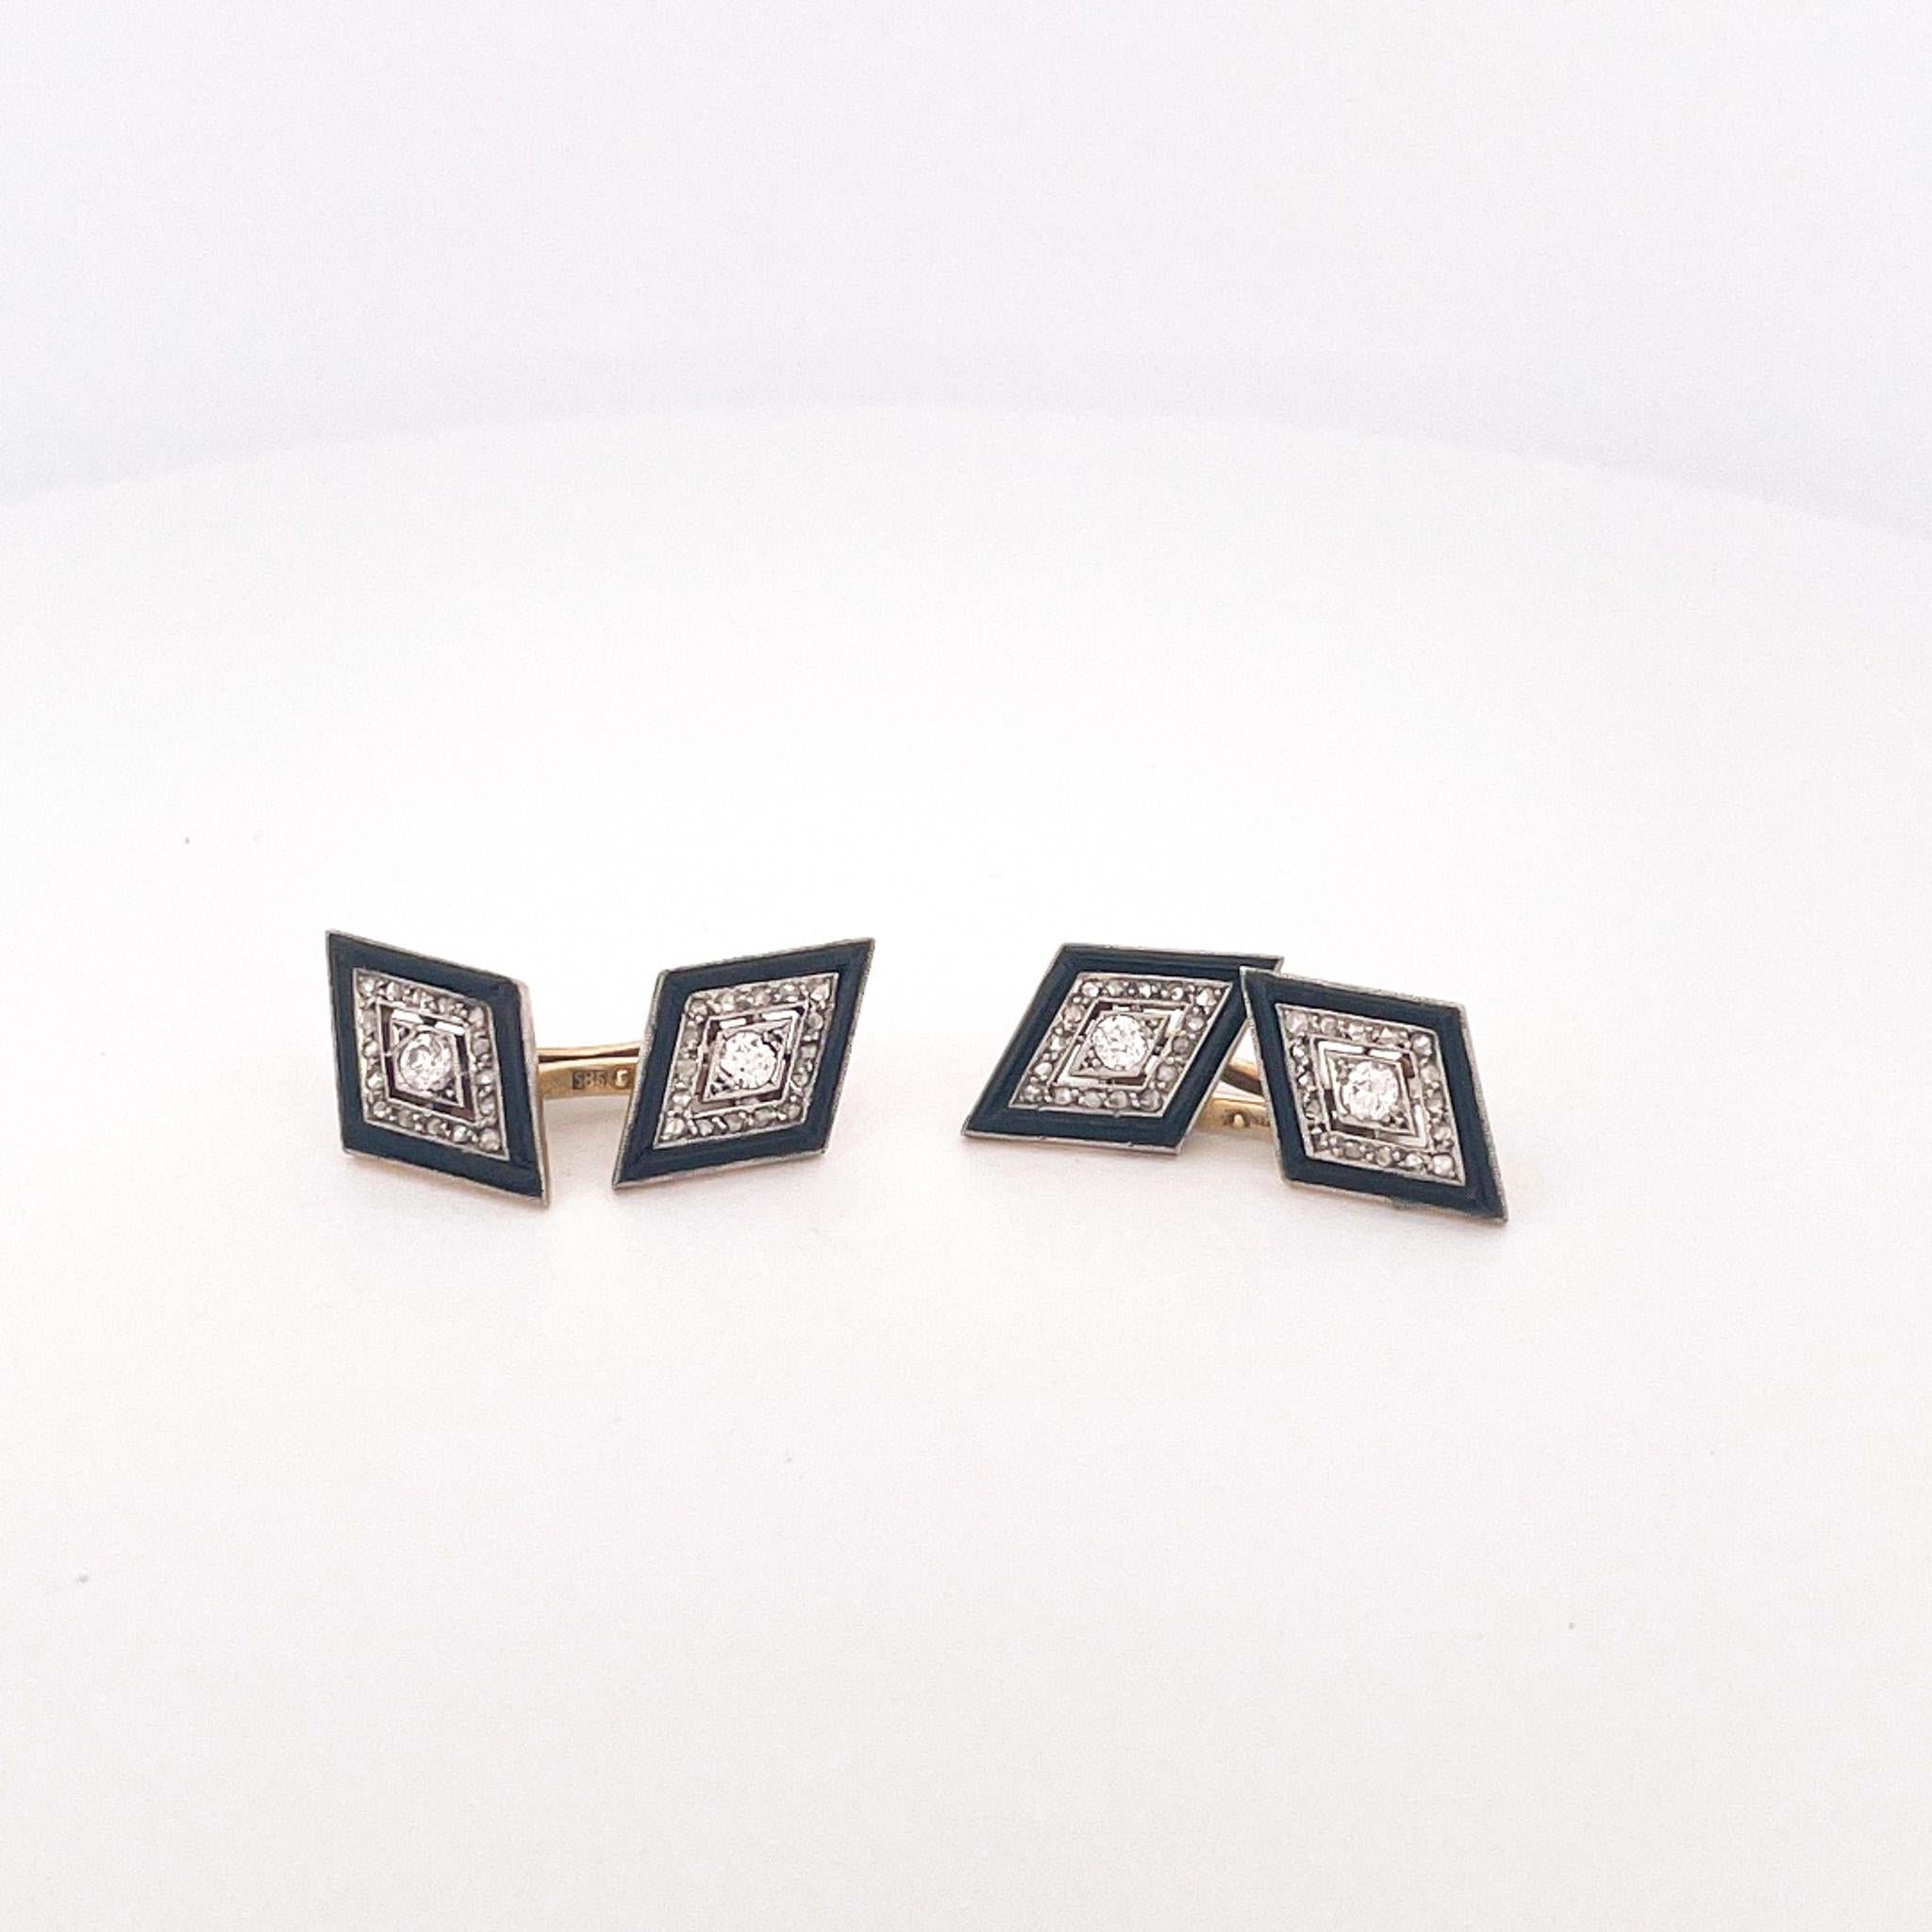 From the Eiseman Estate Jewelry Collection, circa 1950s, 14 karat yellow gold black jade and diamond cufflinks. These cufflinks are crafted with 64 rose cut diamonds with a total combined weight of 0.50 carats. These diamonds have LMN color and SI